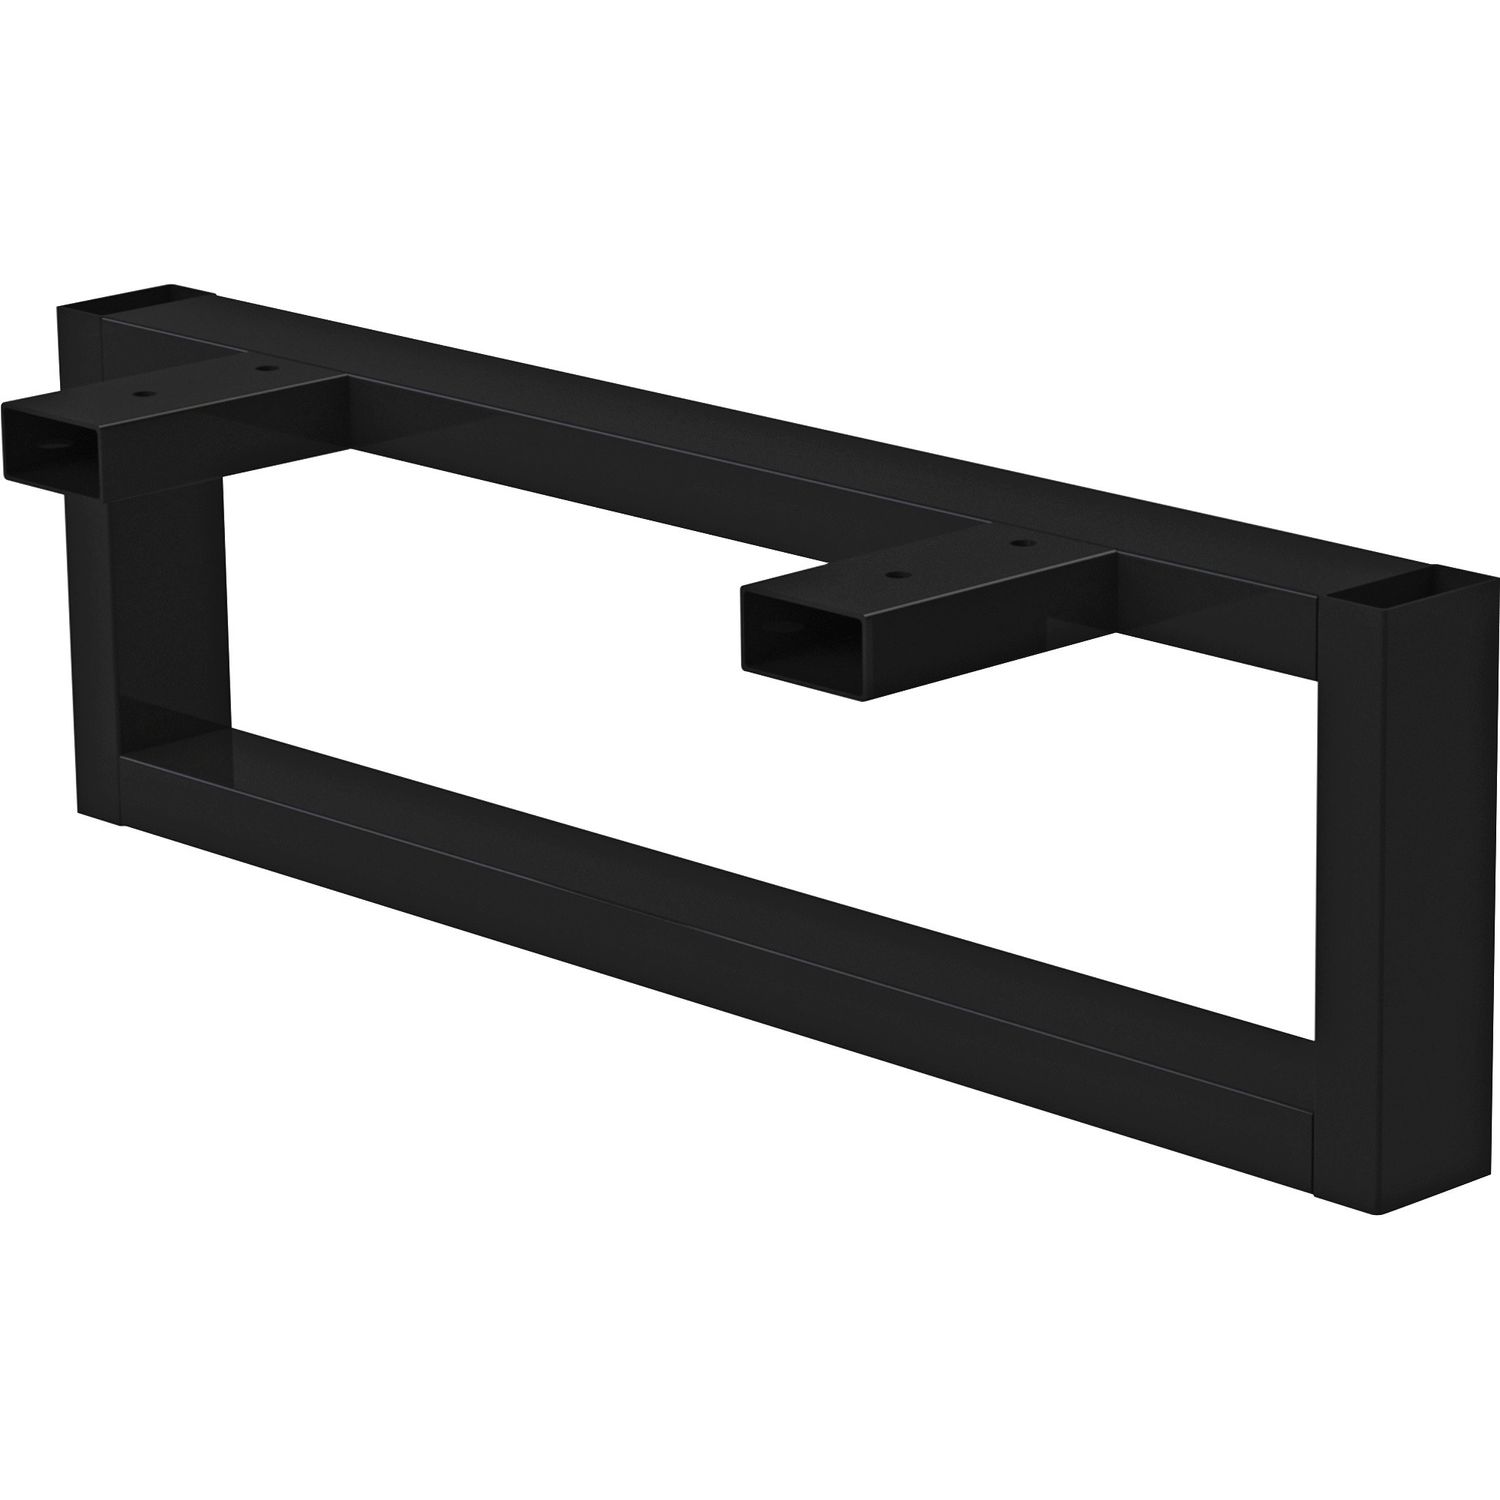 Low Worksurface Support O-Leg Contemporary, 2" Width x 23.5" Depth x 7" Height, Steel, Black